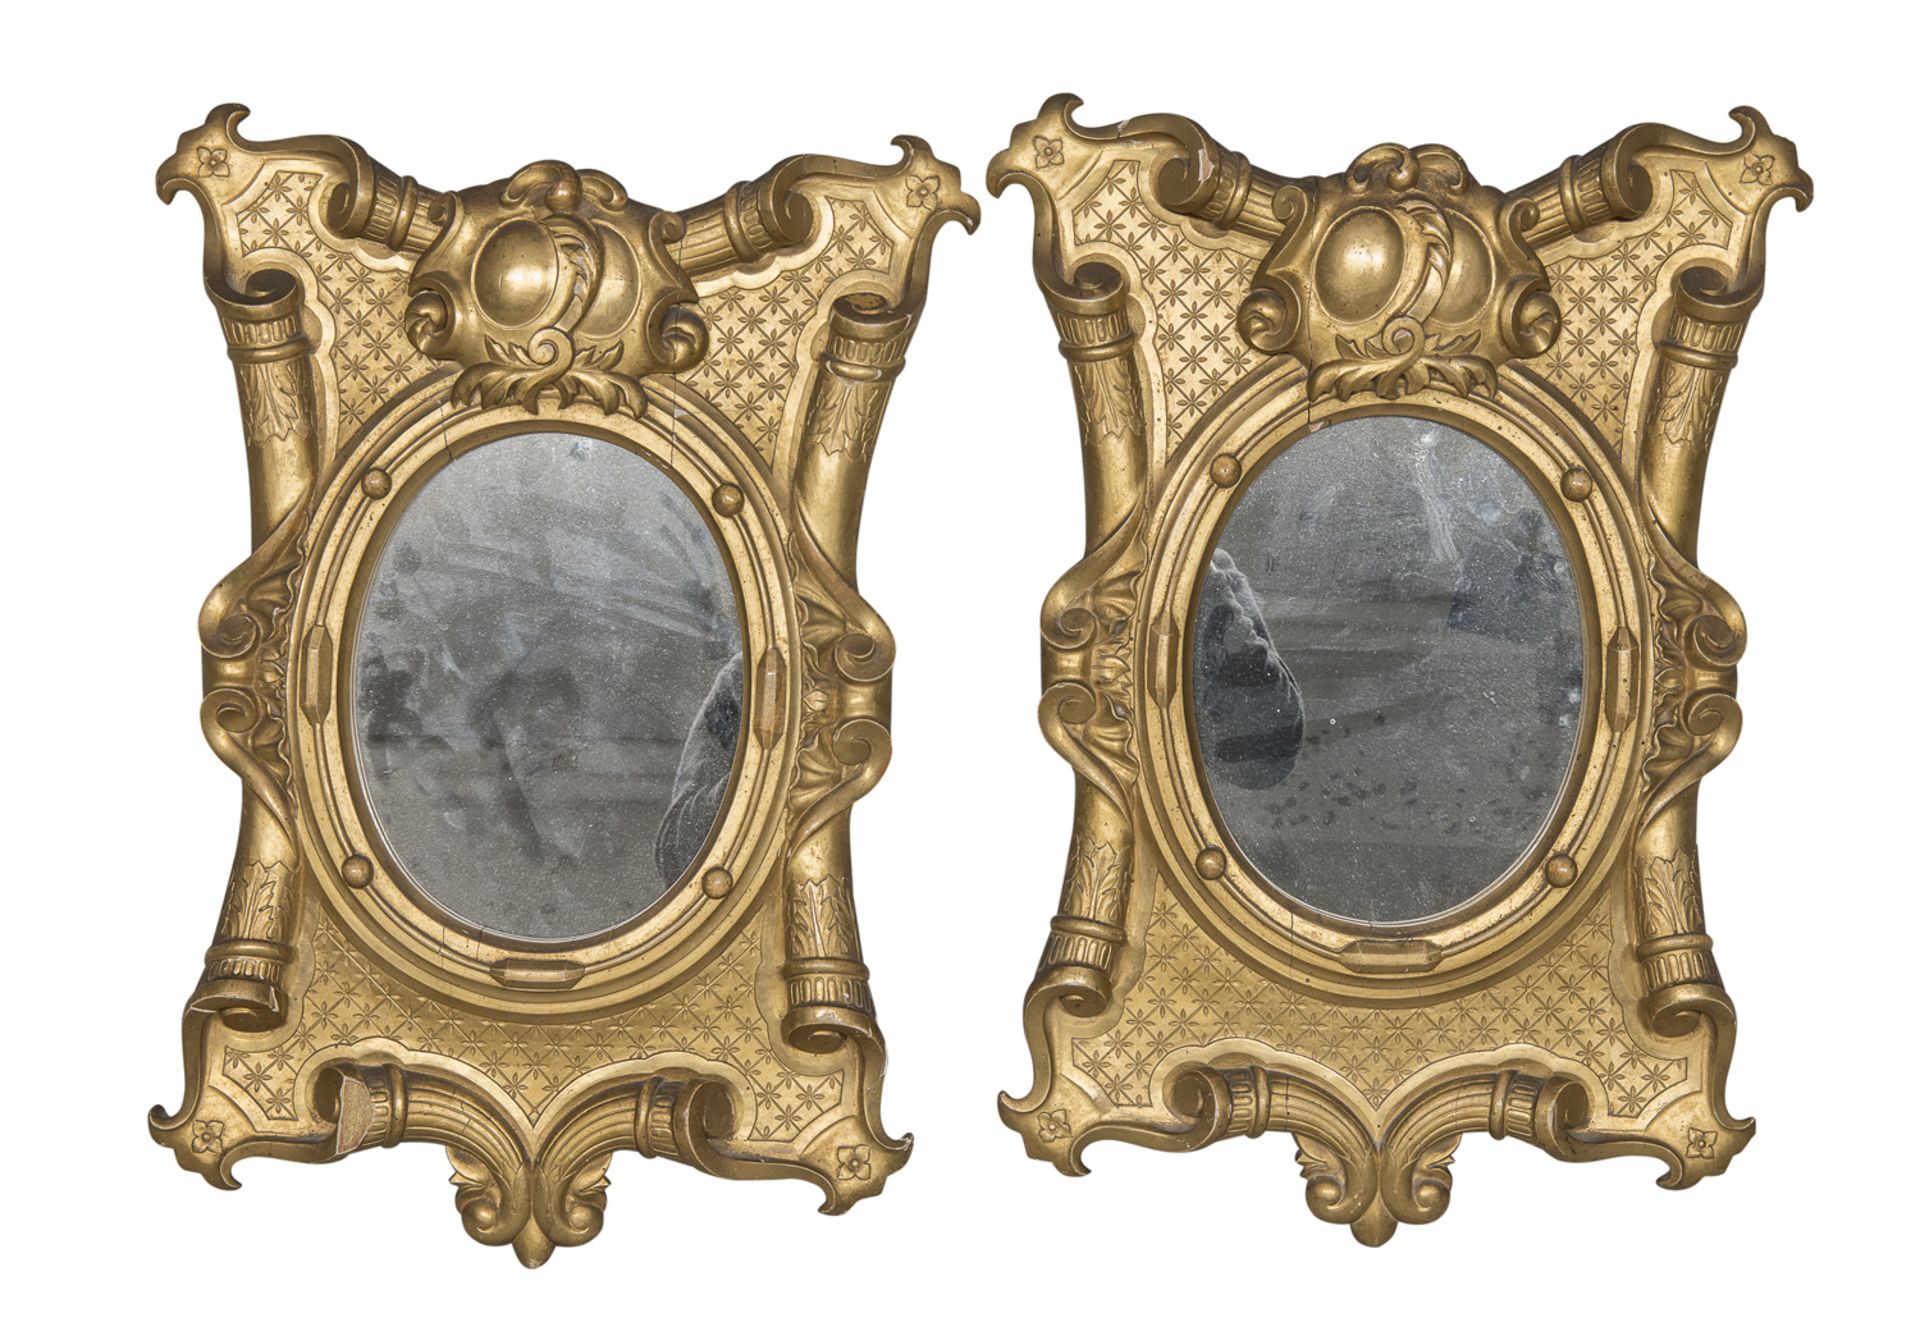 PAIR OF GILTWOOD MIRRORS 19TH CENTURY